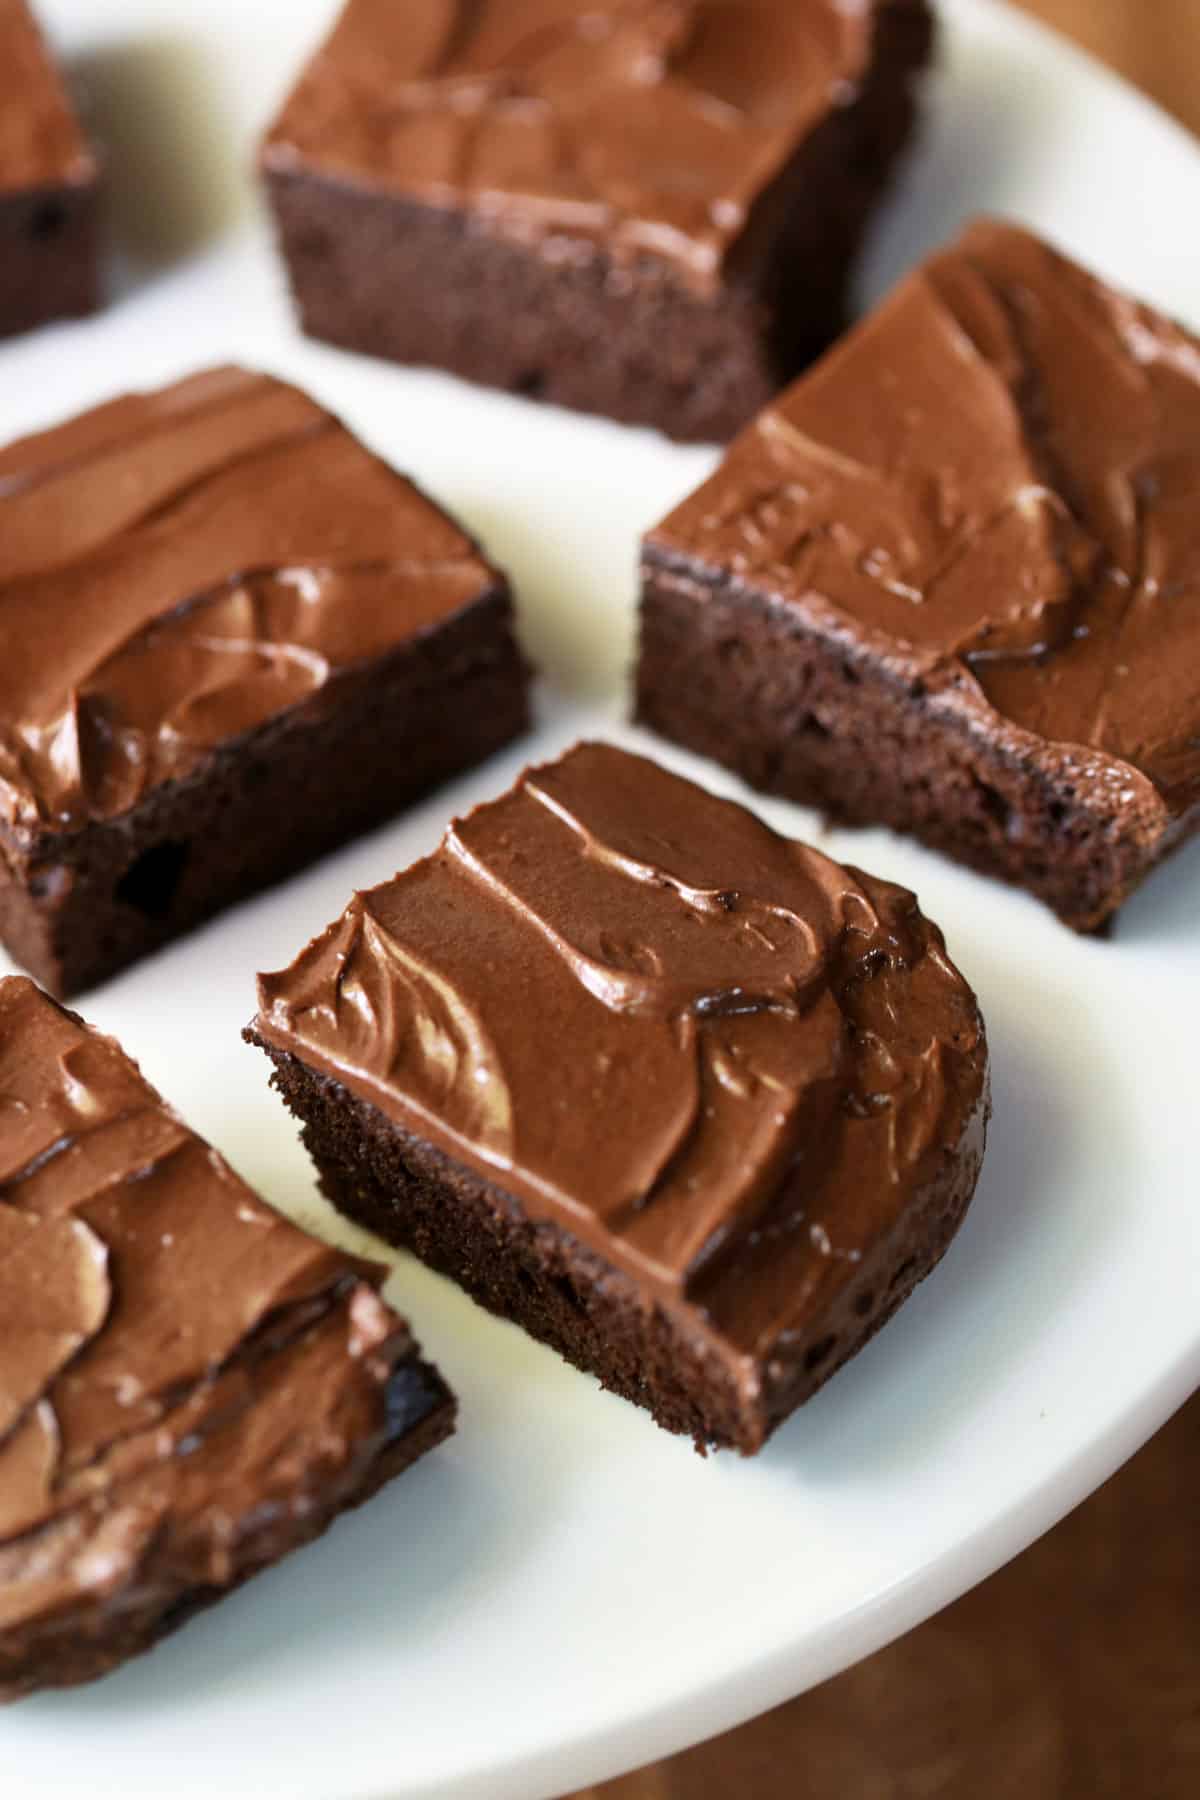 Keto chocolate cake pieces with chocolate frosting served on a white plate.